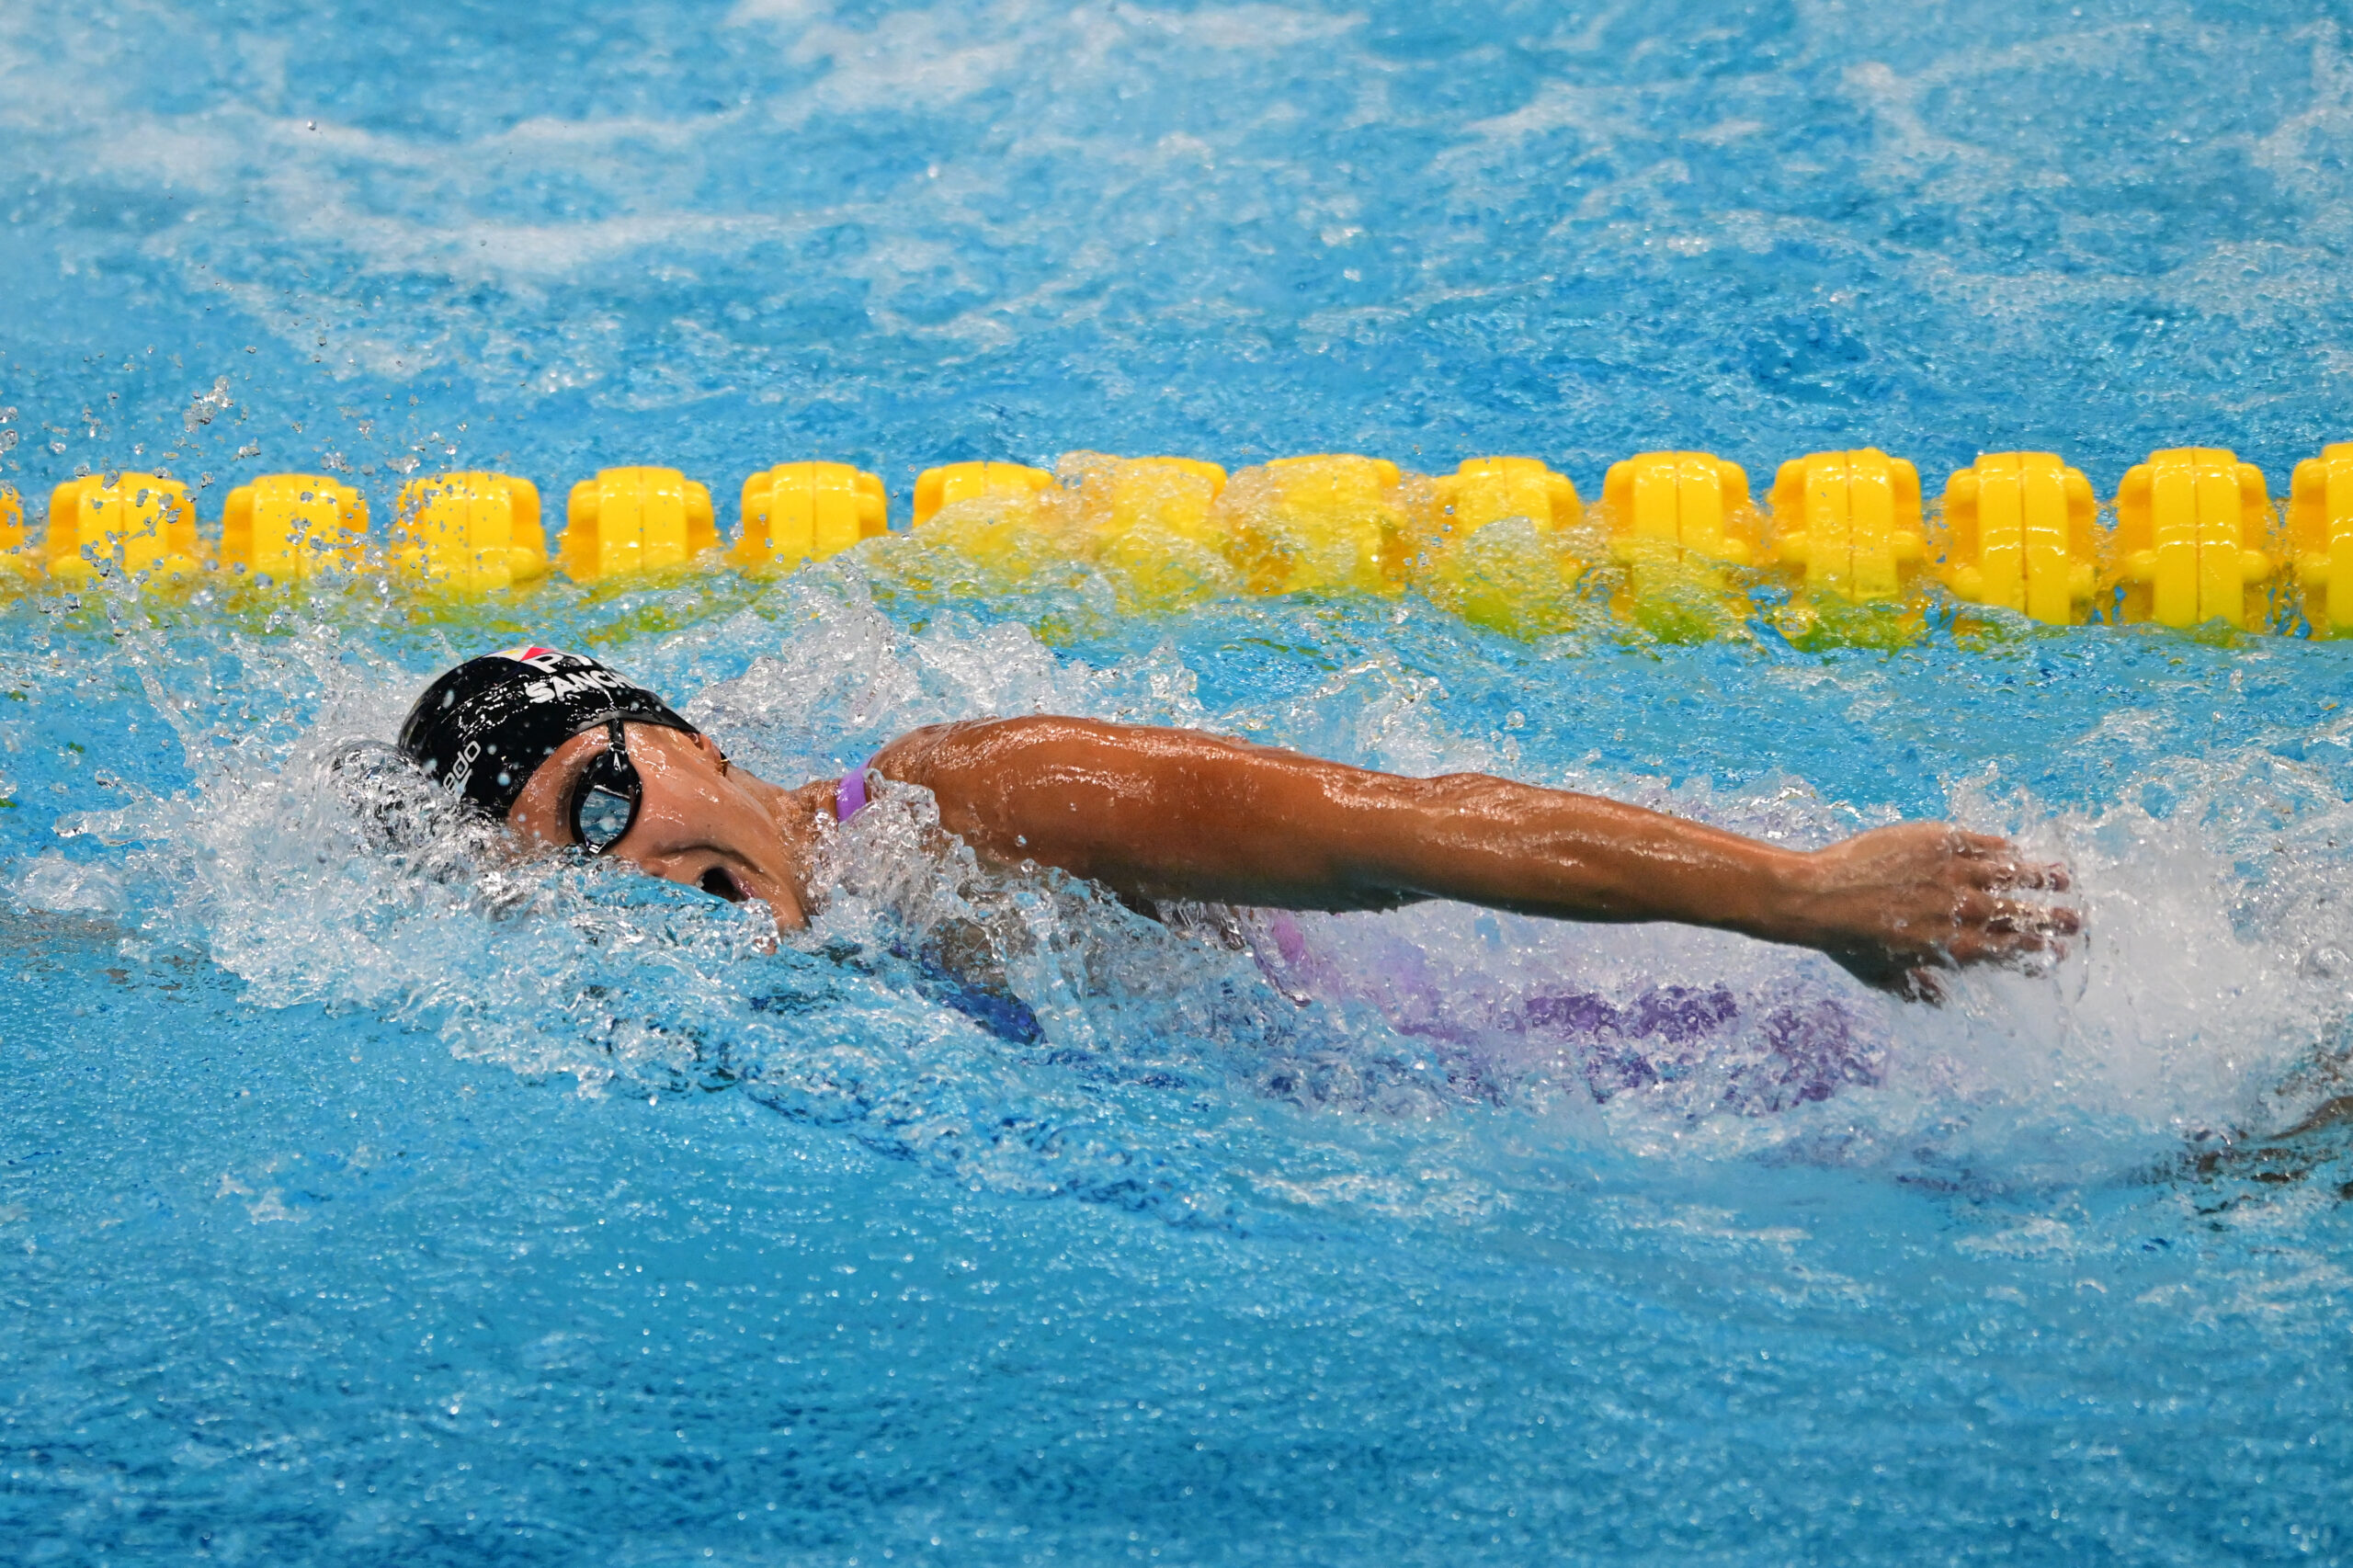 Kayla Noelle Sanchez of the Philippines is seen during the 19th Asian Games Women's 400m Freestyle Swimming Final held at the Hangzhou Olympic Sports Centre Aquatic Sports Arena in Hangzhou, China.